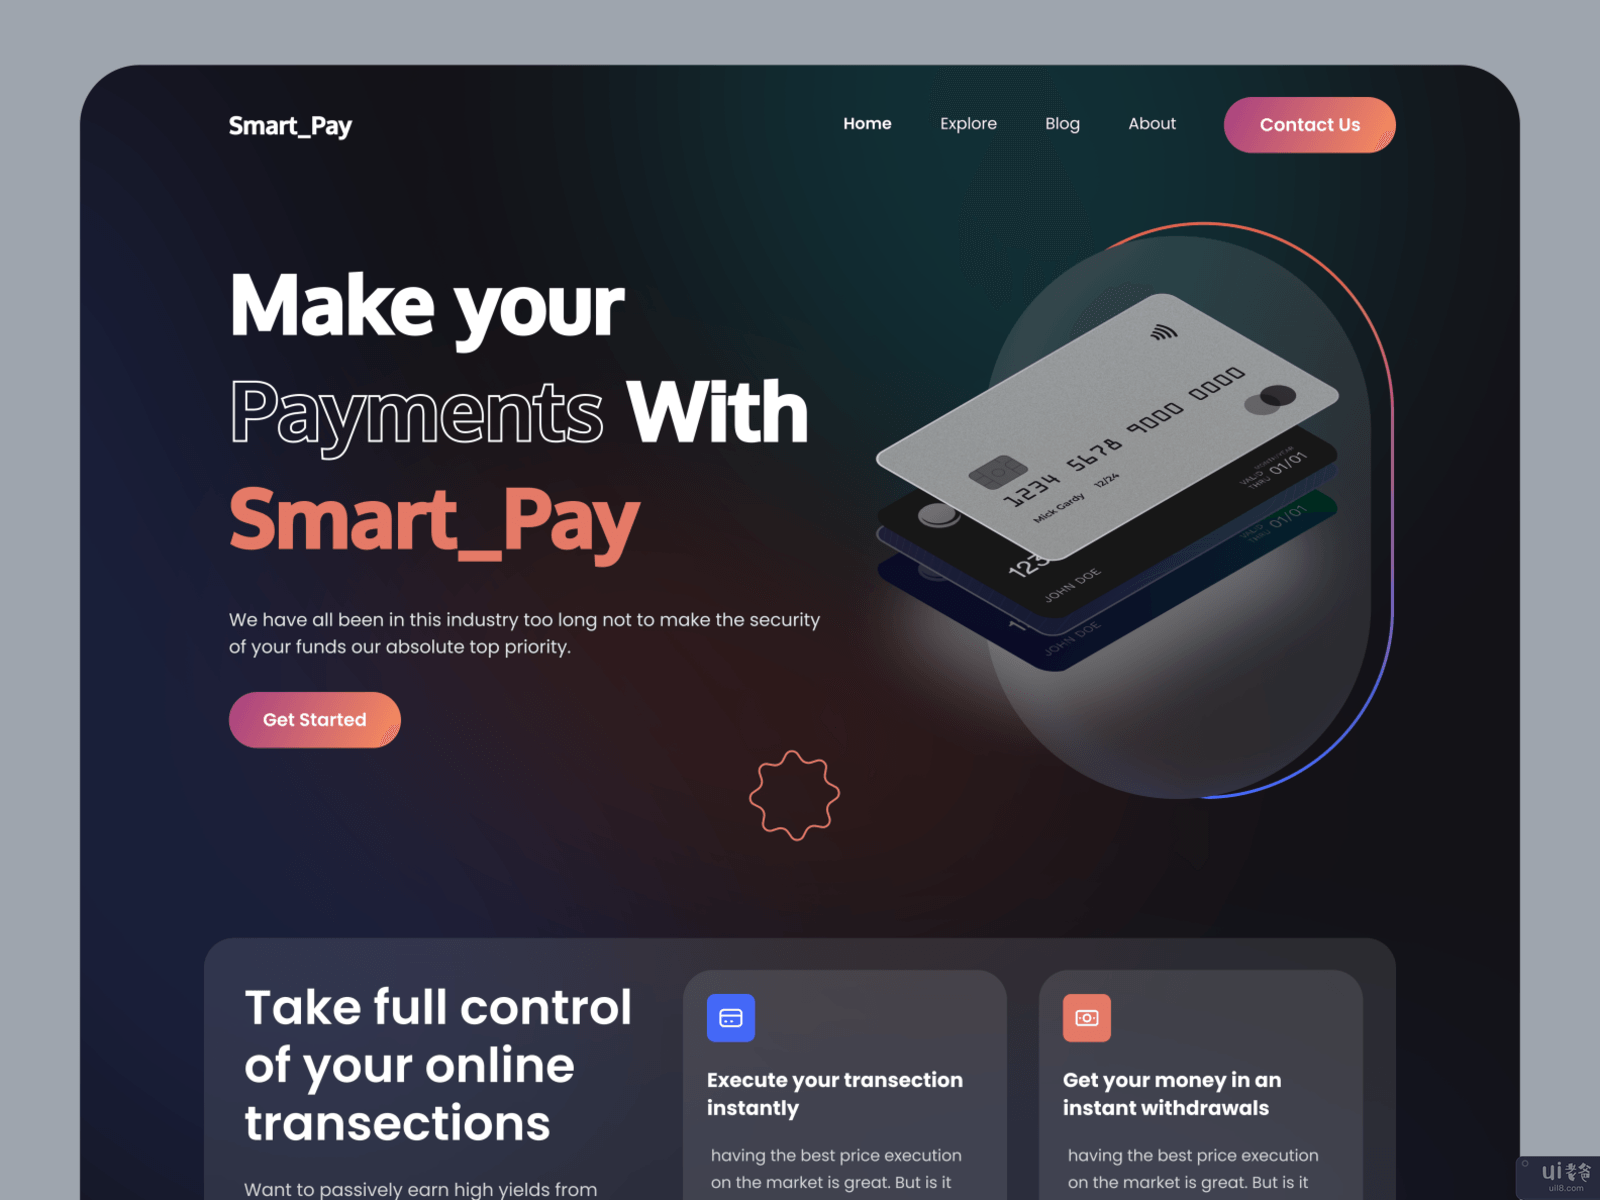 Smart_Pay登陆页面(Smart_Pay Landing page)插图